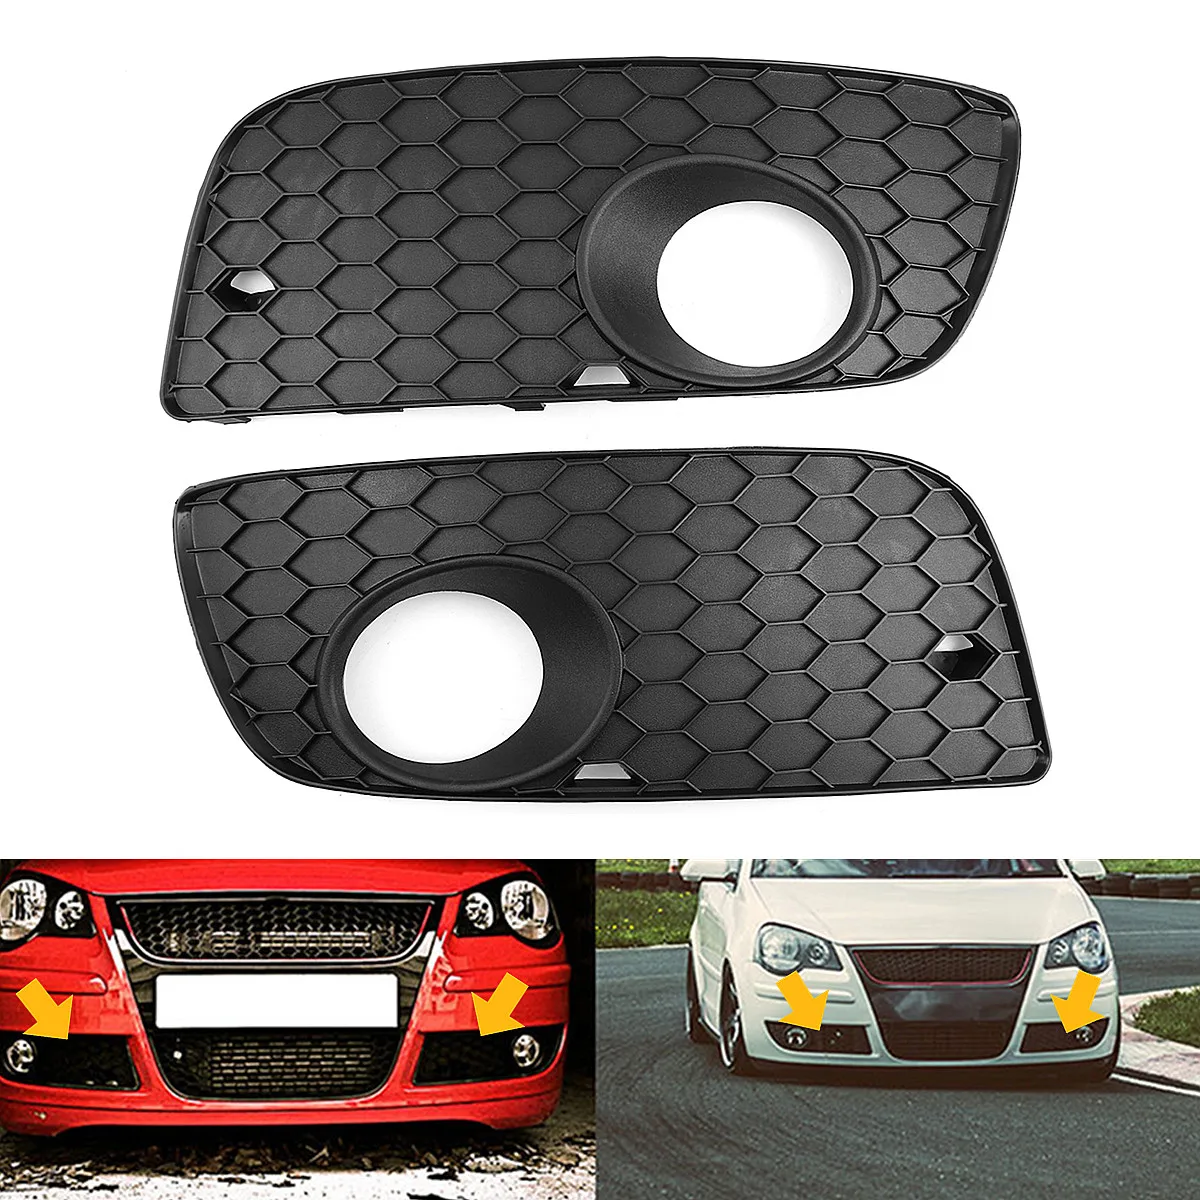 1 Pair for VW POLO GTI 2006 2009 Front Bumper Lower Fog Light Cover